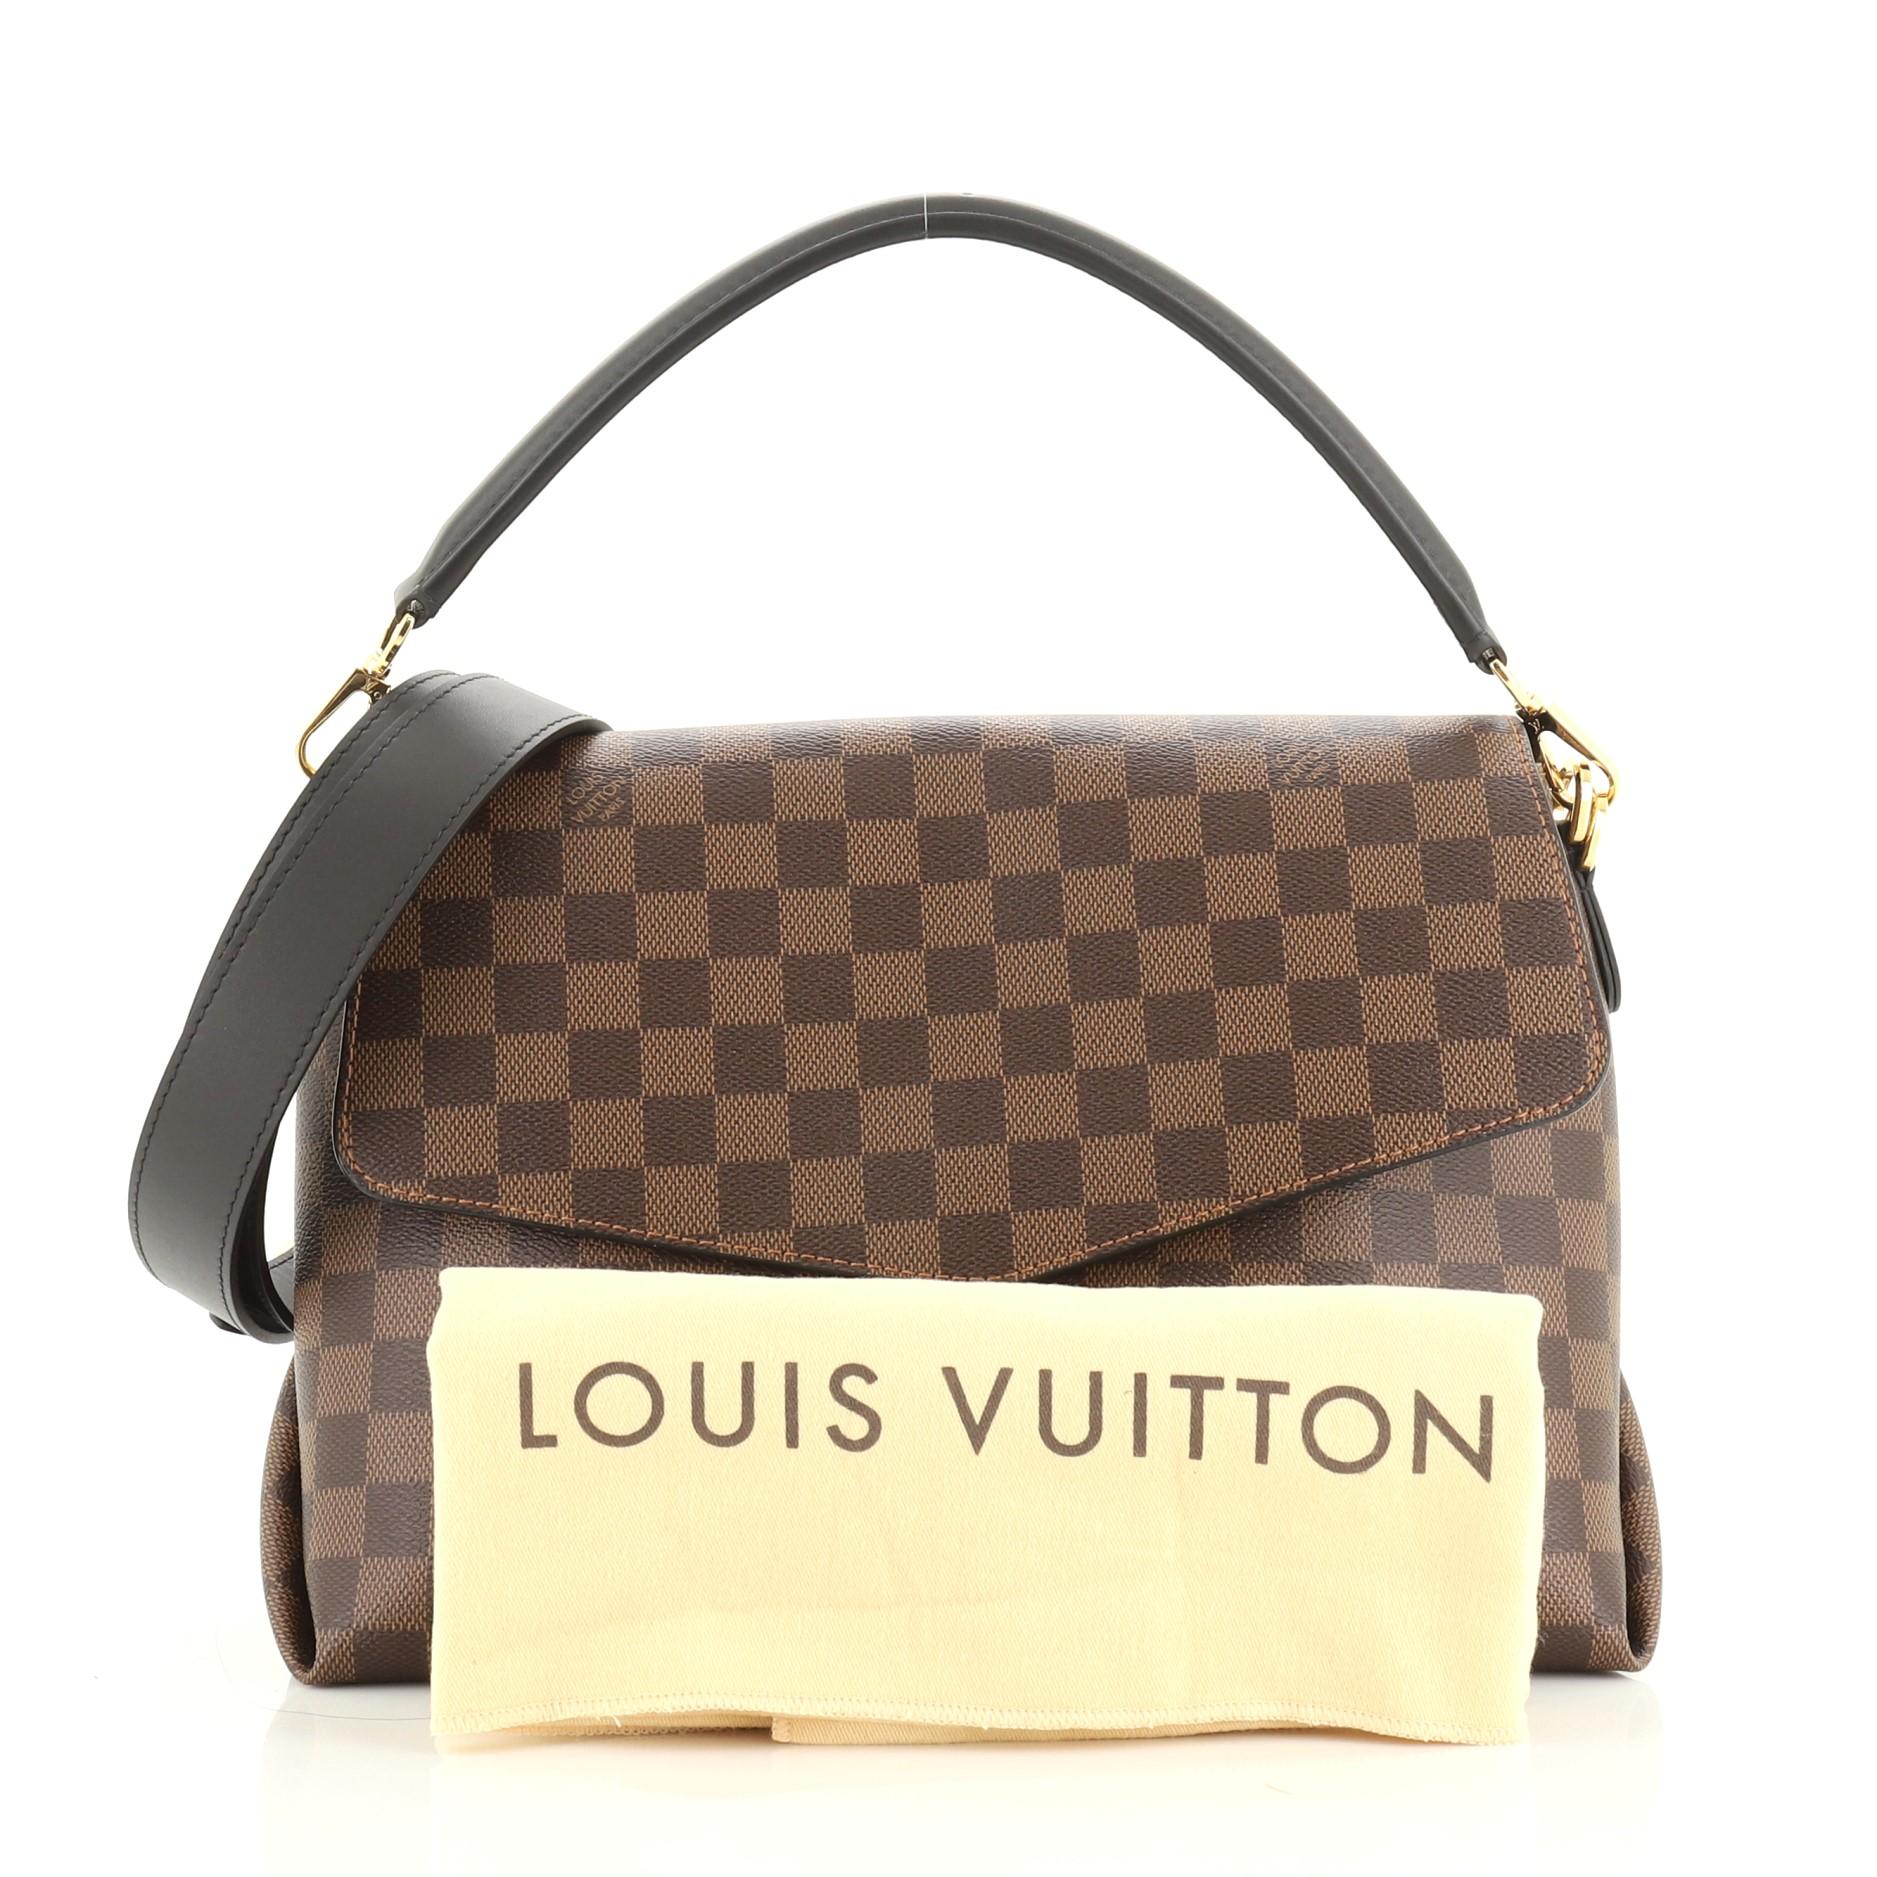 This Louis Vuitton Beaubourg Handbag Damier MM, crafted in Damier ebene coated canvas, features envelope style flap, a flat leather handle, and gold-tone hardware. Its magnetic snap closure opens to a black microfiber interior with slip pockets.